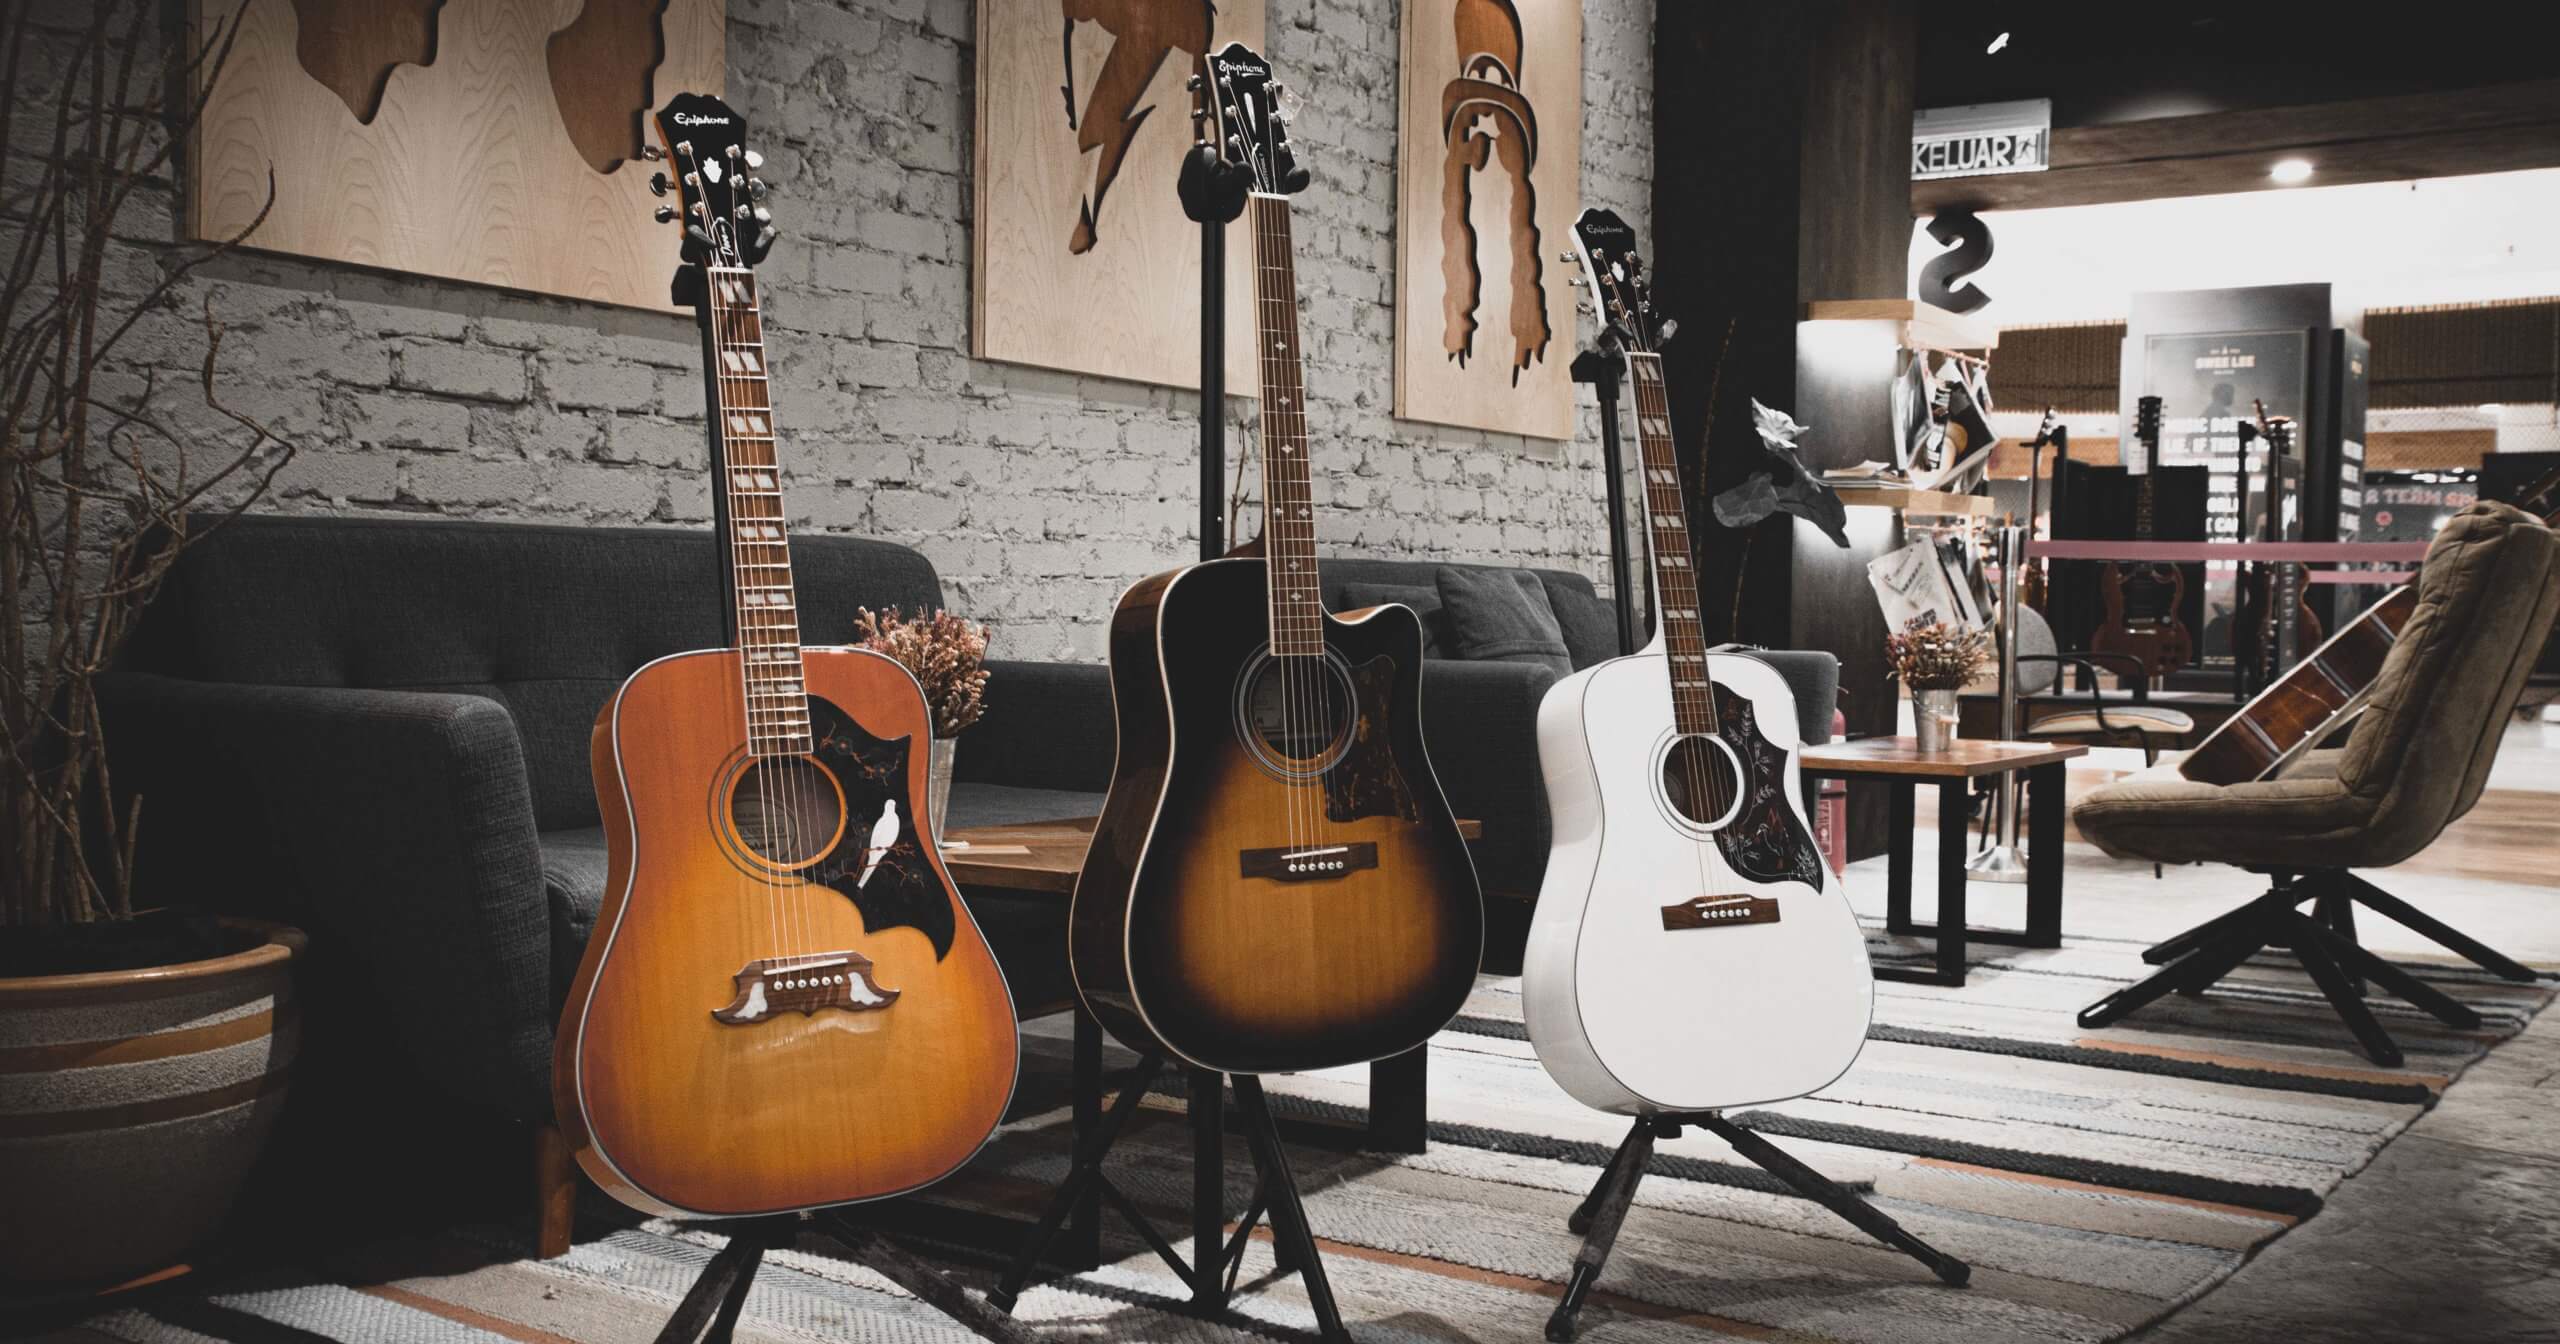 Epiphone's Acoustic Guitars for 2020 - Swee Lee Blog